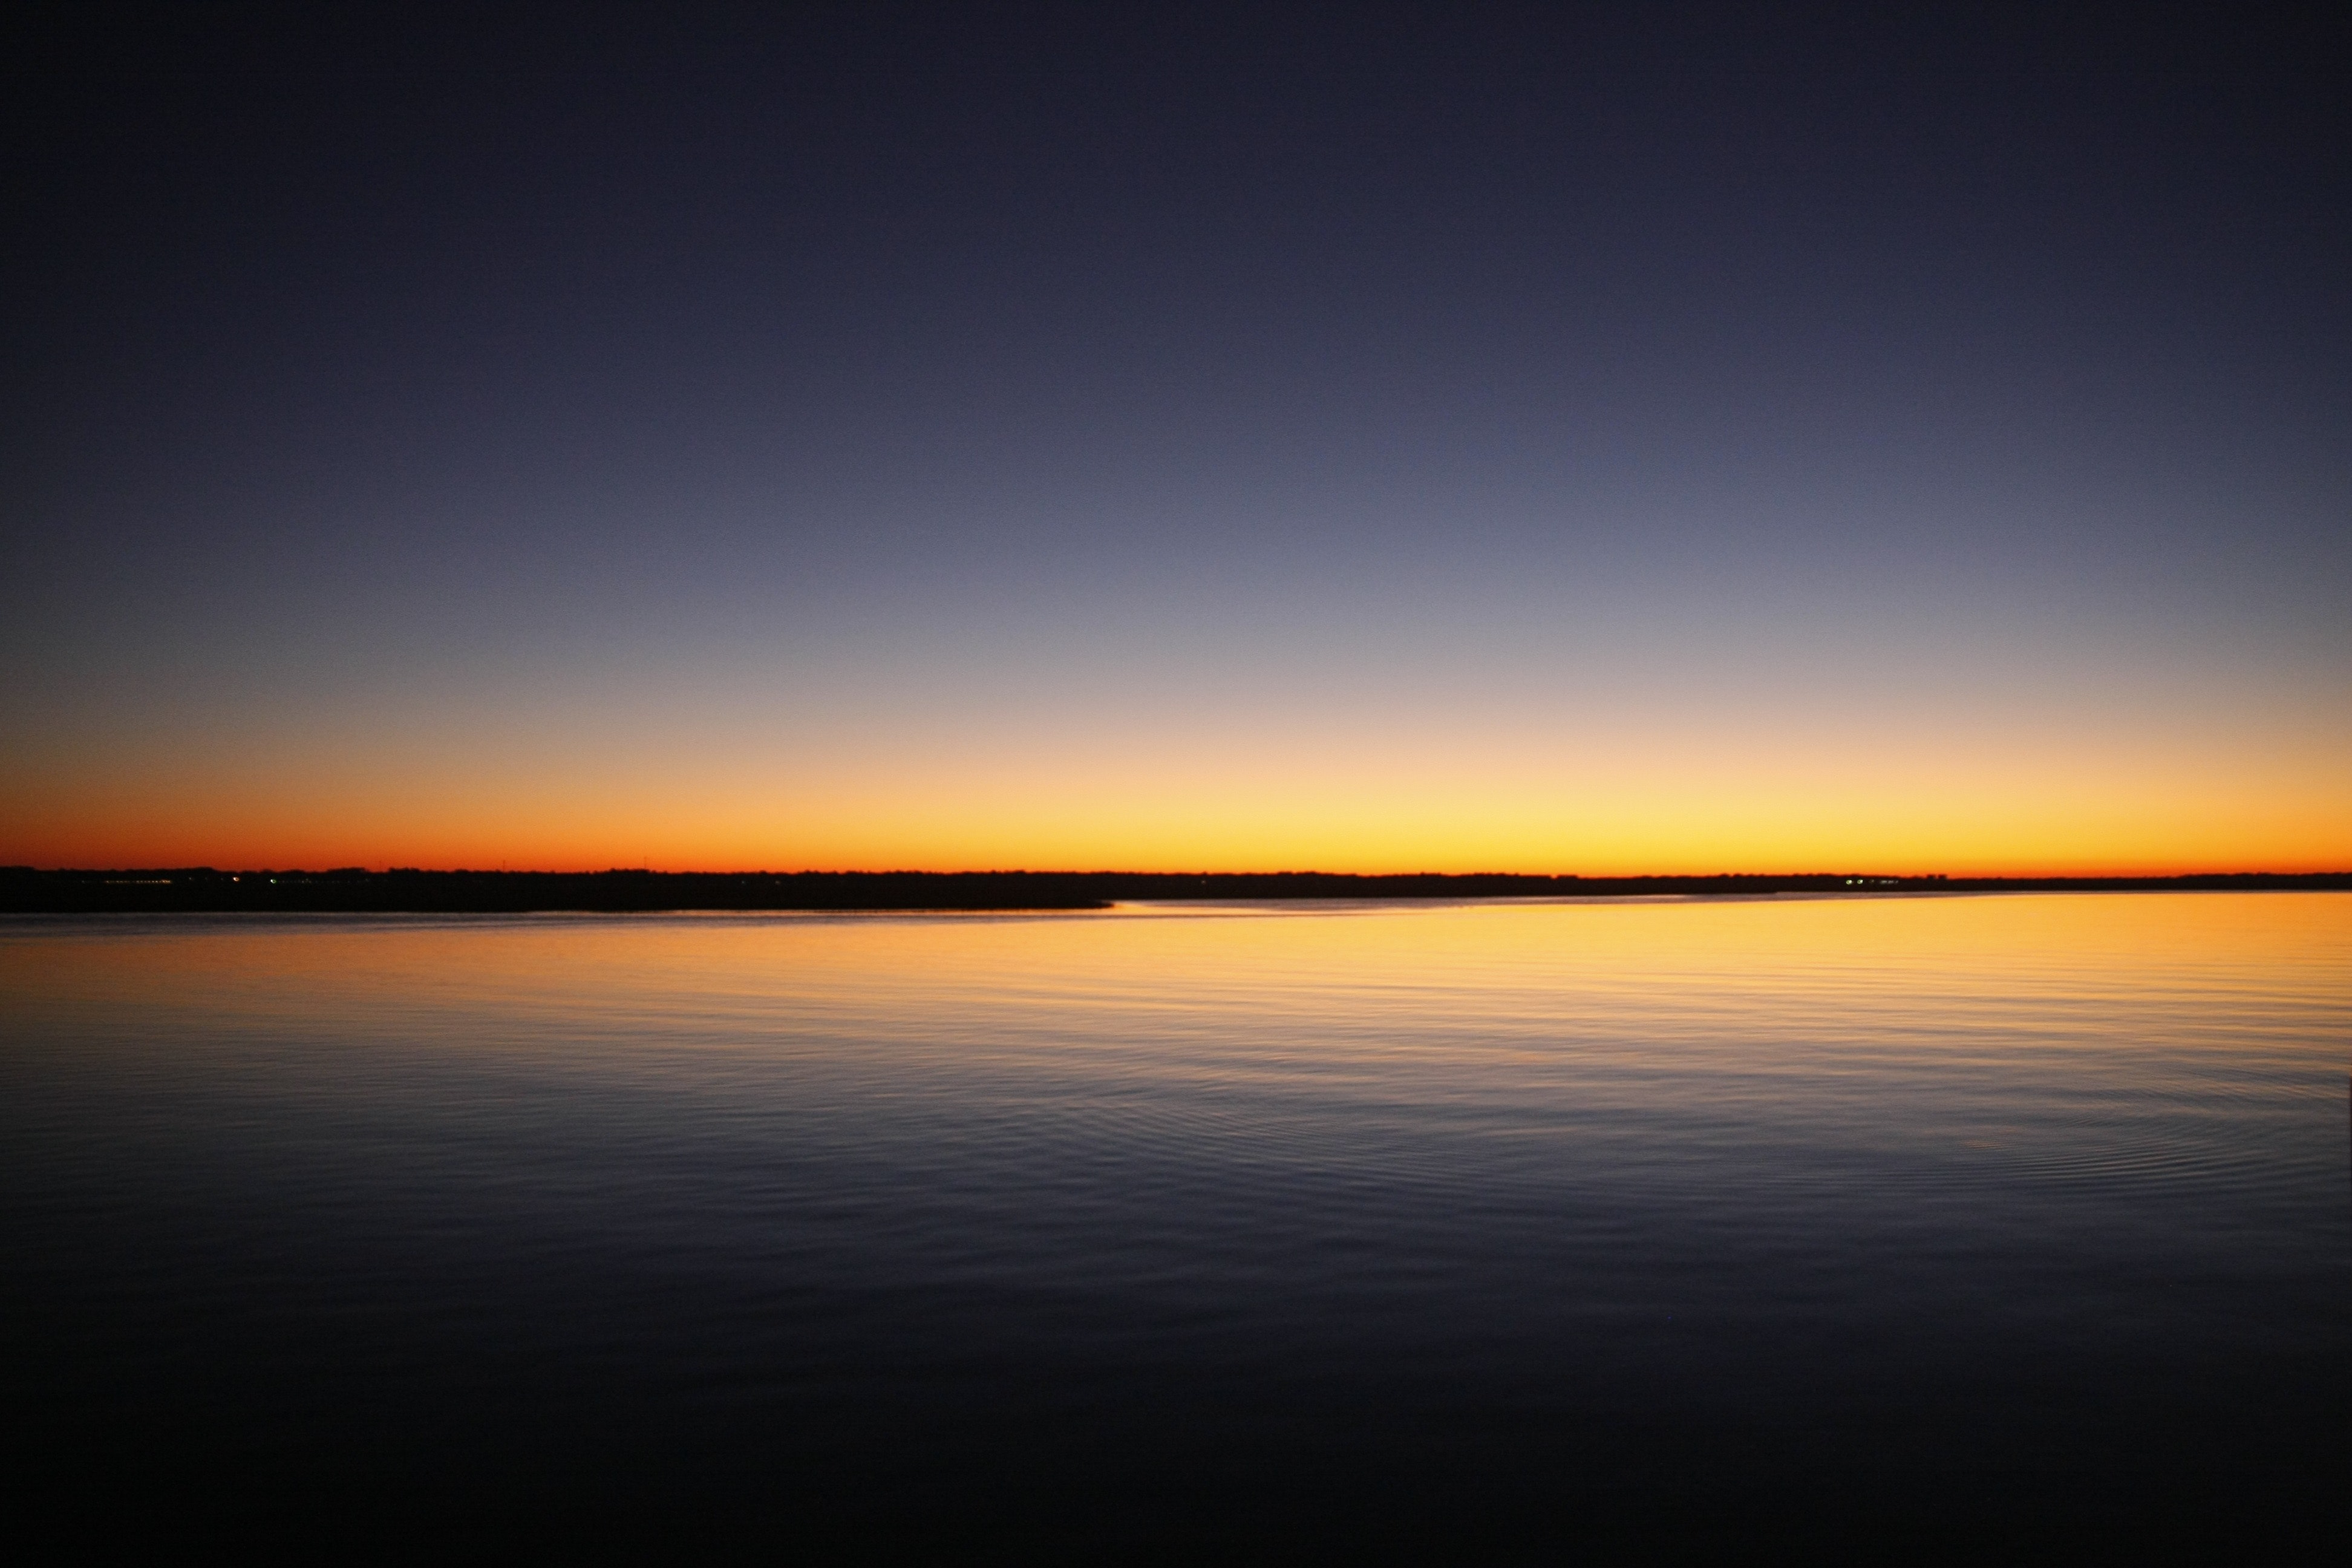 Silhouette of Calm Sea Under Blue and Orange Clear Sky during Sunset, Calm waters, Sea, Tranquil, Sunset, HQ Photo